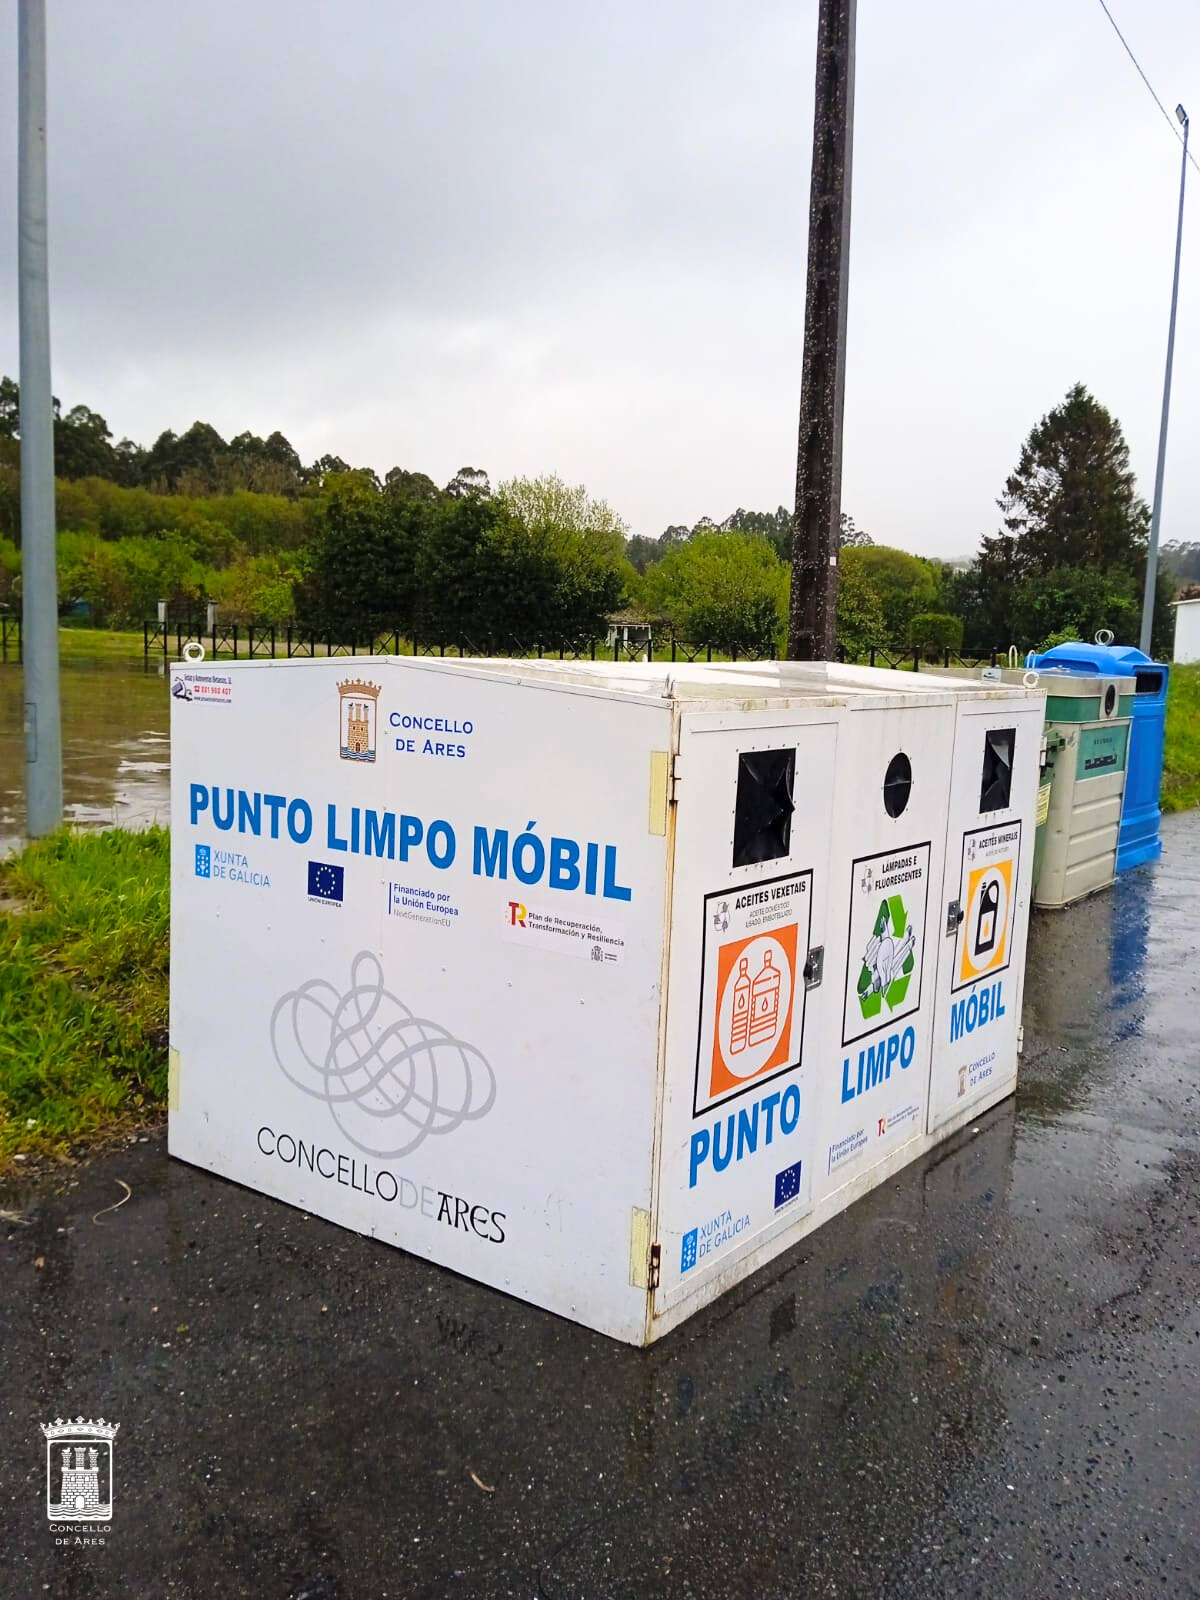 2024-Punto limpo_mobil-abril-seselle-2